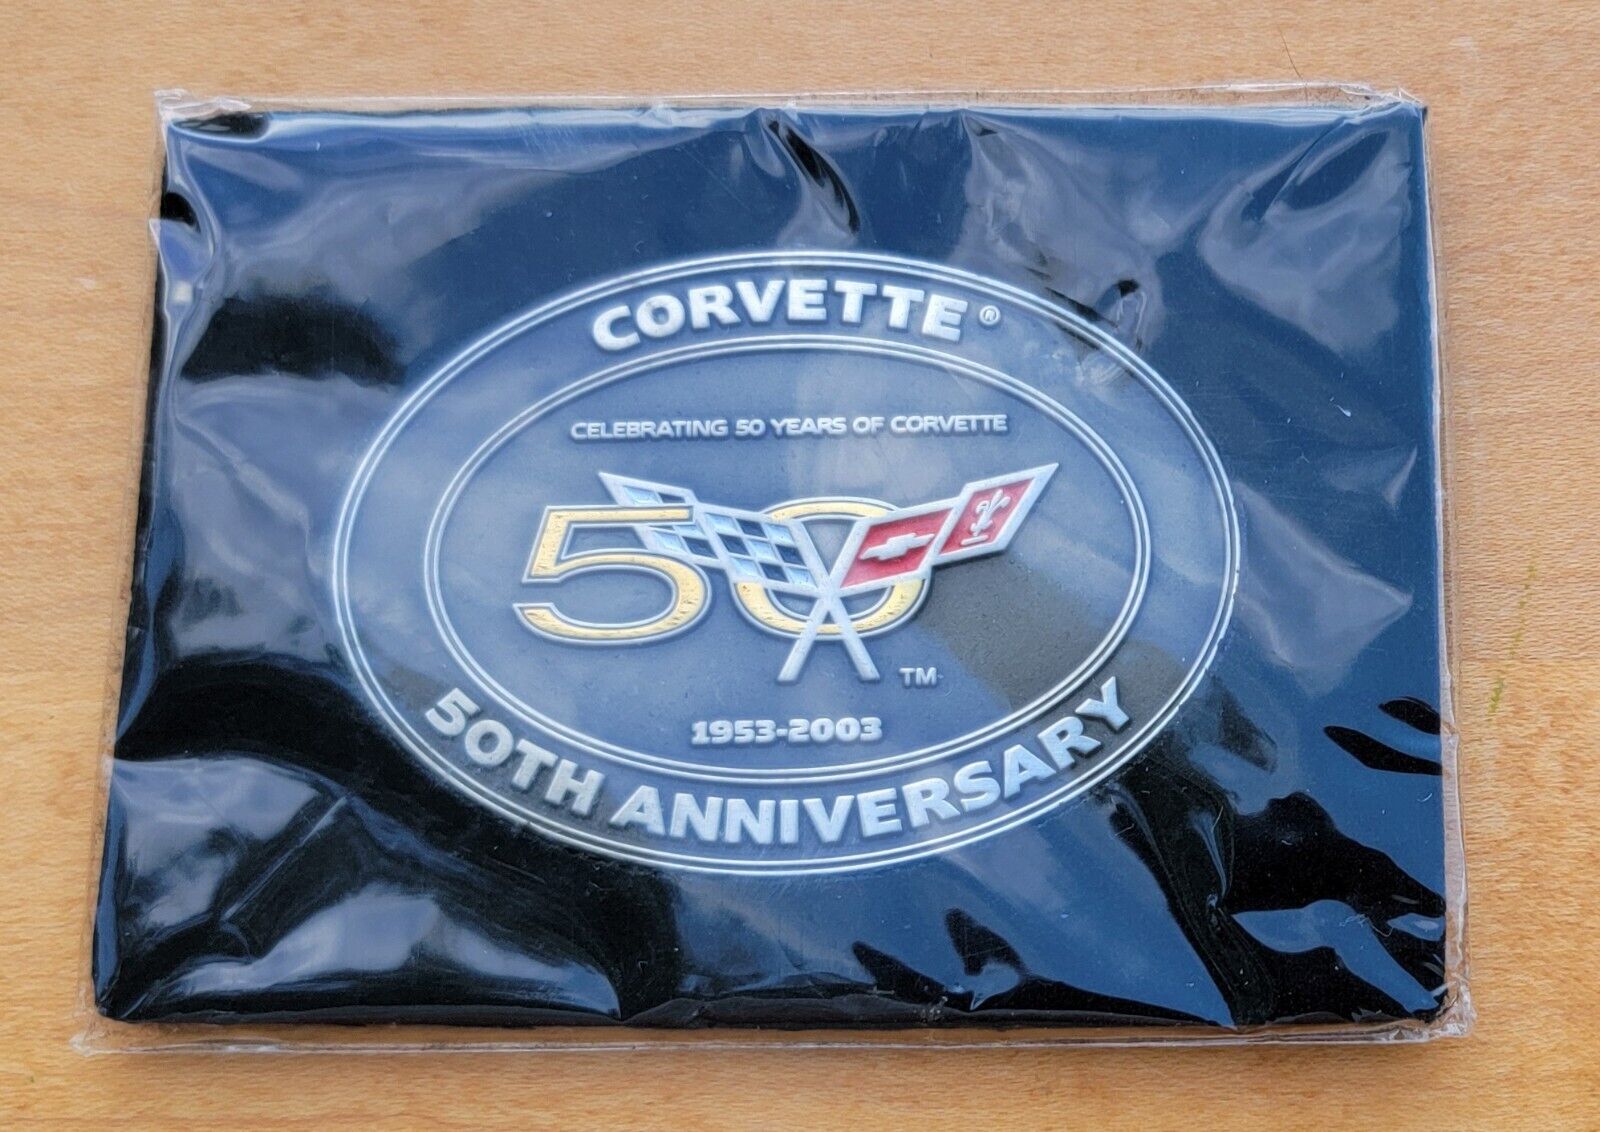 Corvette 50th Anniversary Medallion new in unopened package 1953-2003 Chevy Club